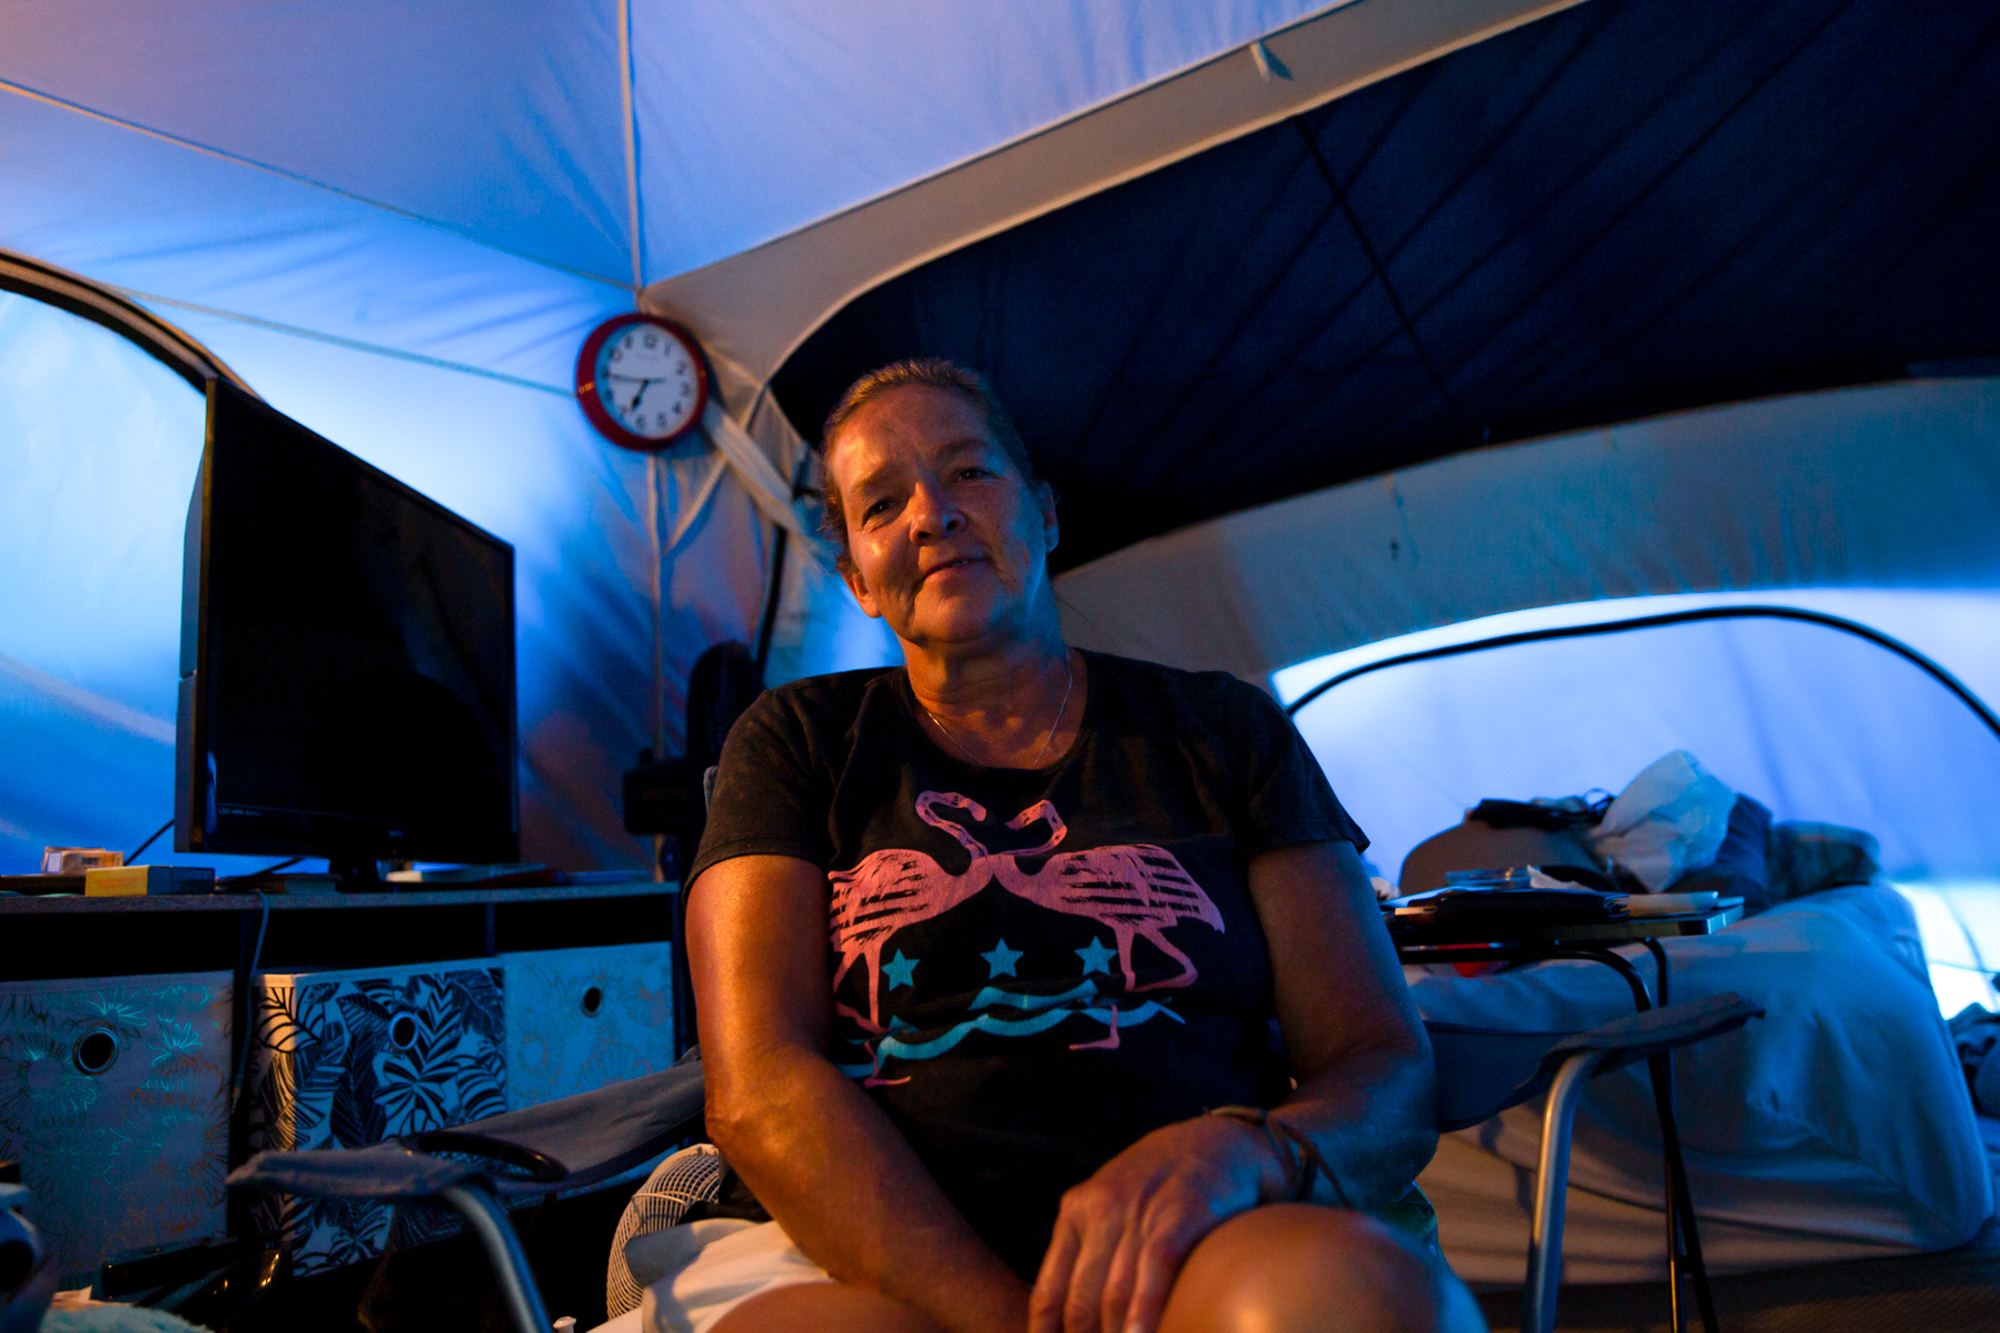 Joyce Buschmann - Joyce Buschmann, whose home was destroyed in Hurricane Michael, now lives in a tent city in Youngstown, Florida. Buschmann's son lives 20 minutes away, but she stays in her tent so as not to burden him. “Why leave when I’m perfectly happy here?” she asked. (Stacy Fernández/News21)